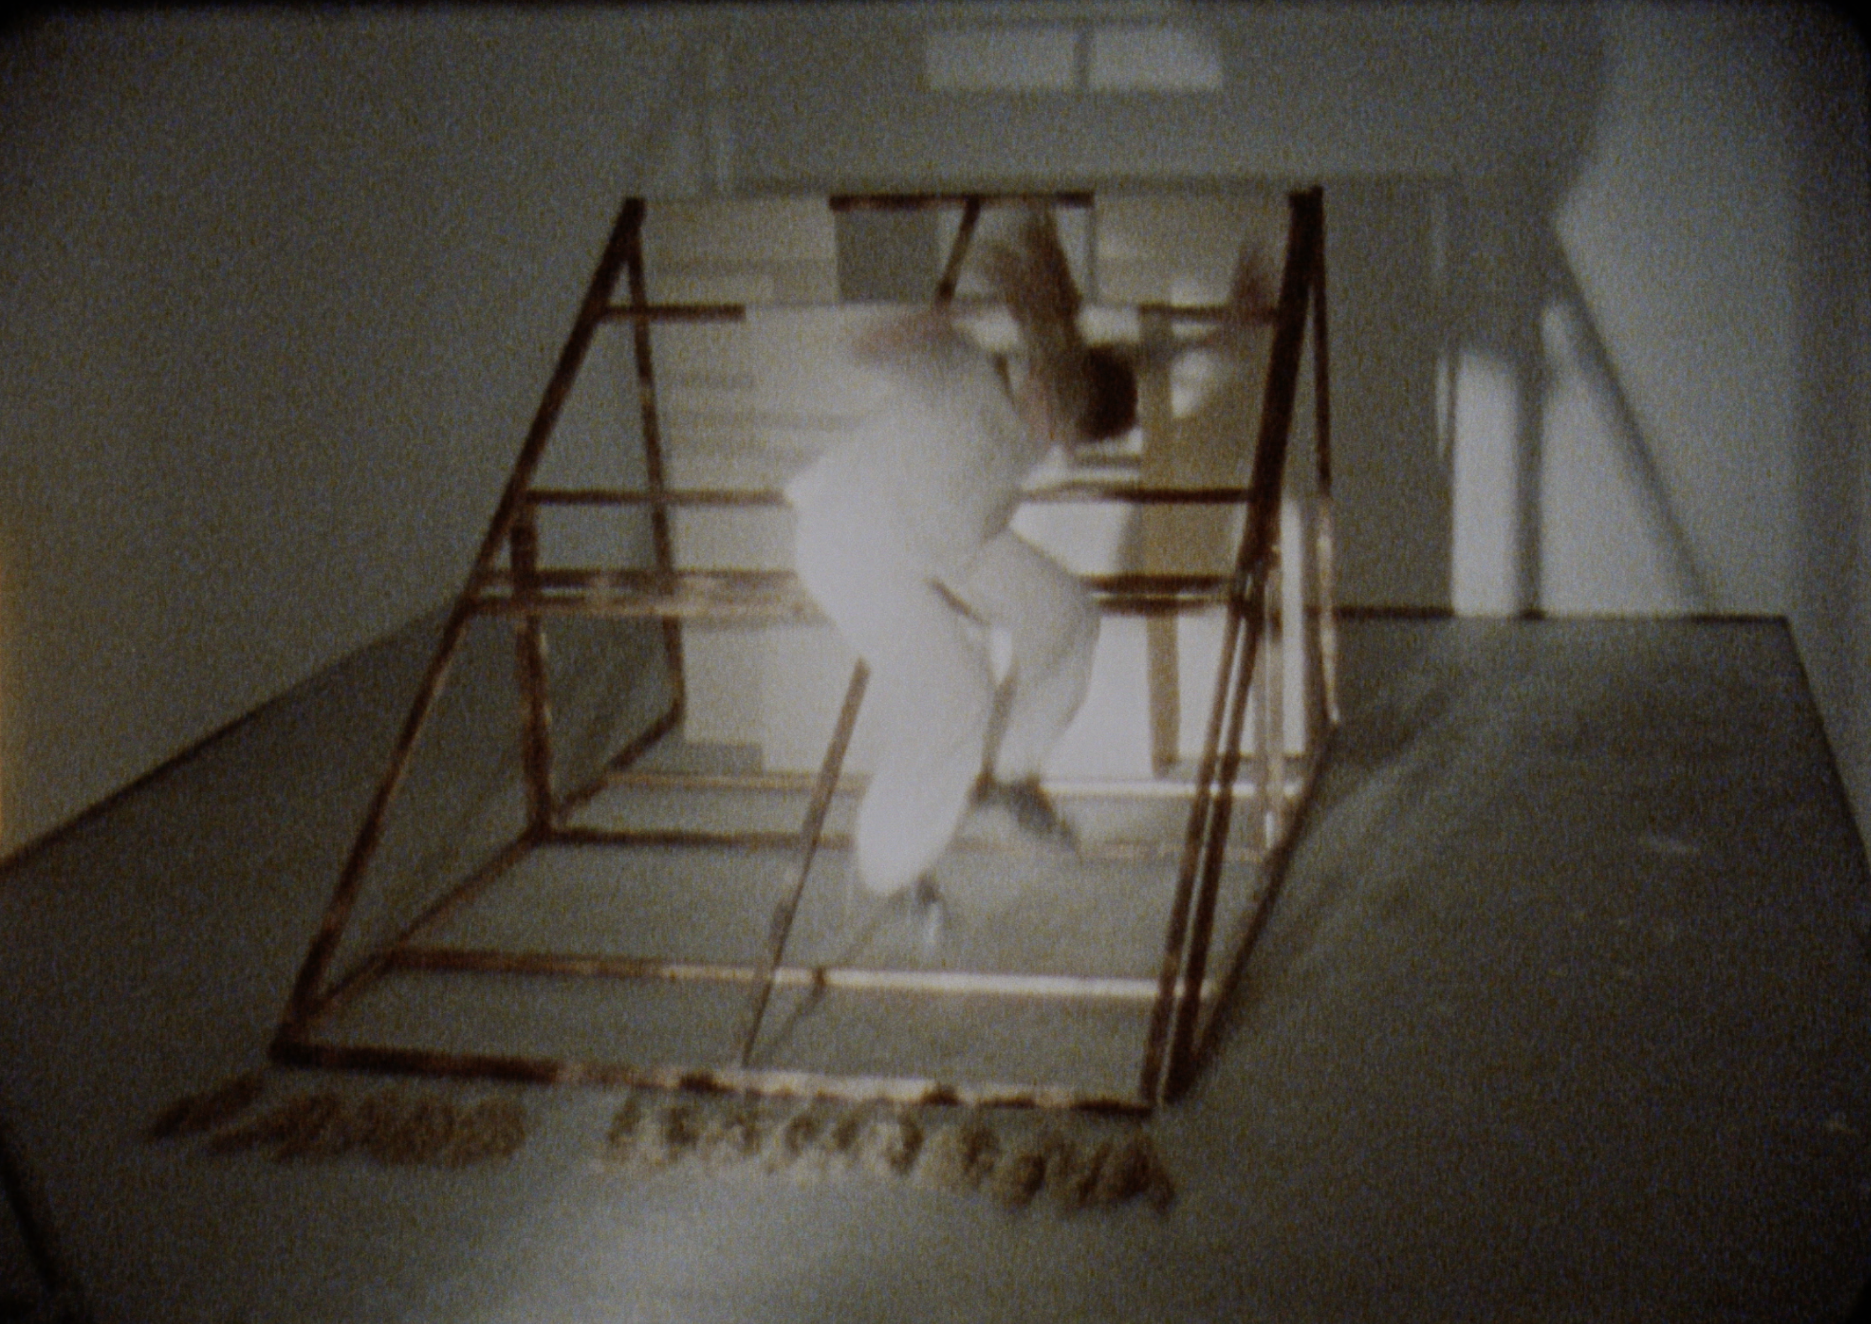 An image of a person dressed in white jumping onto a wooden, wedge-shaped object.